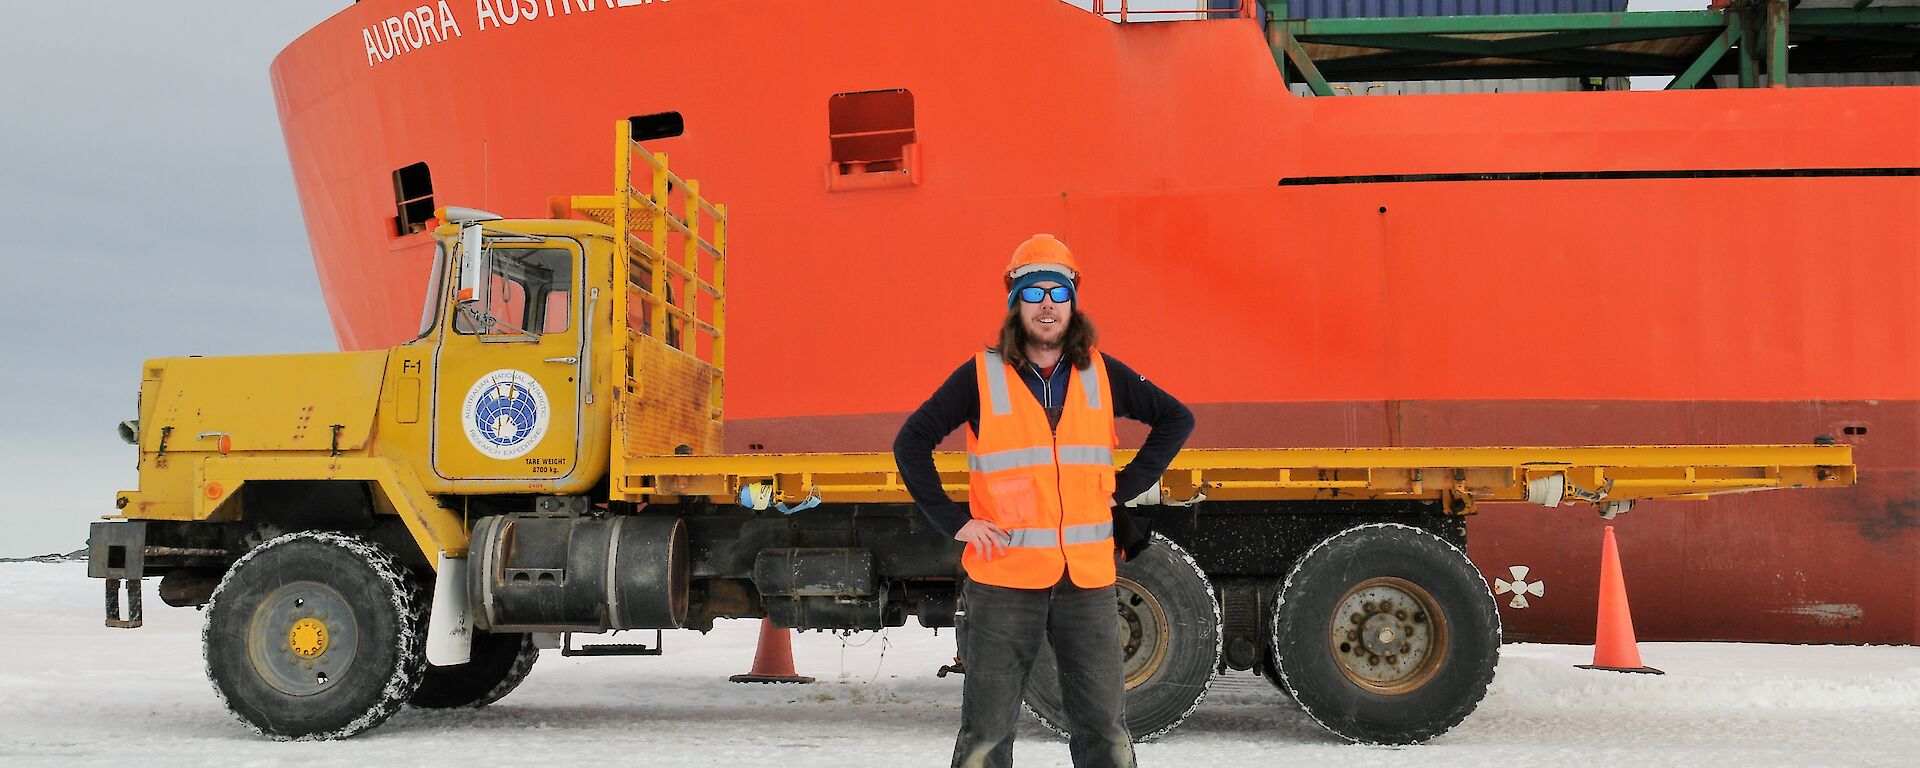 A man is standing on the sea ice in front of a yellow truck parked in front of a red icebreaker ship